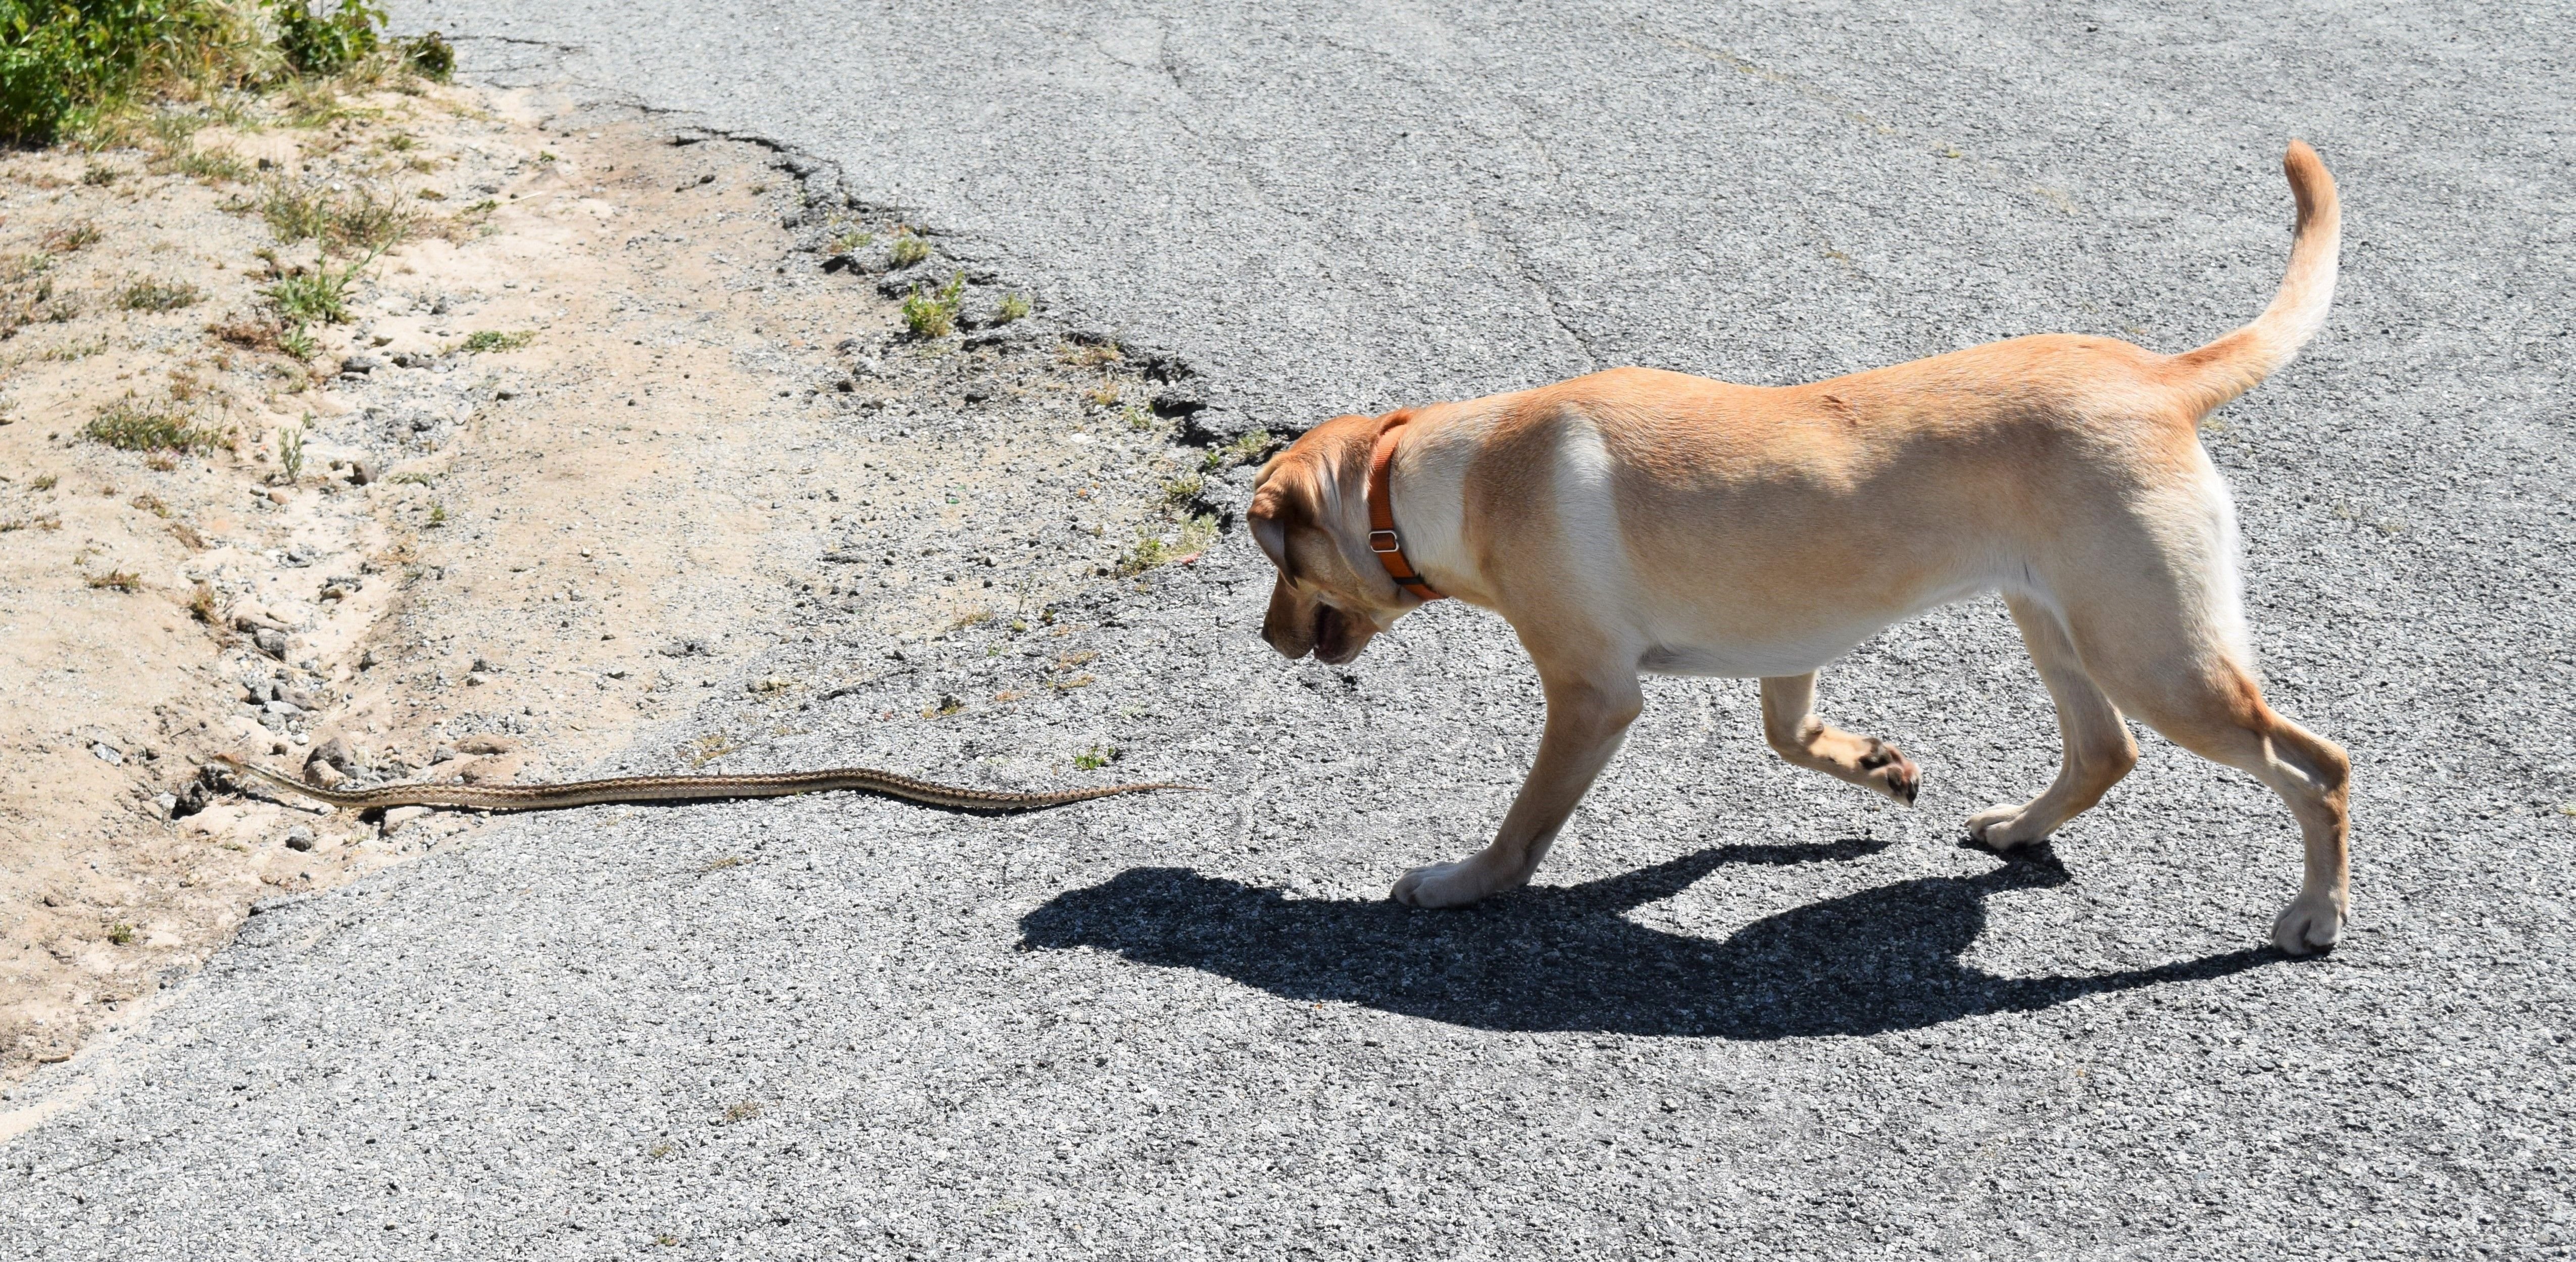 A labrador dog chases a gopher snake in the hills of Monterey,  California. | Source: Shutterstock